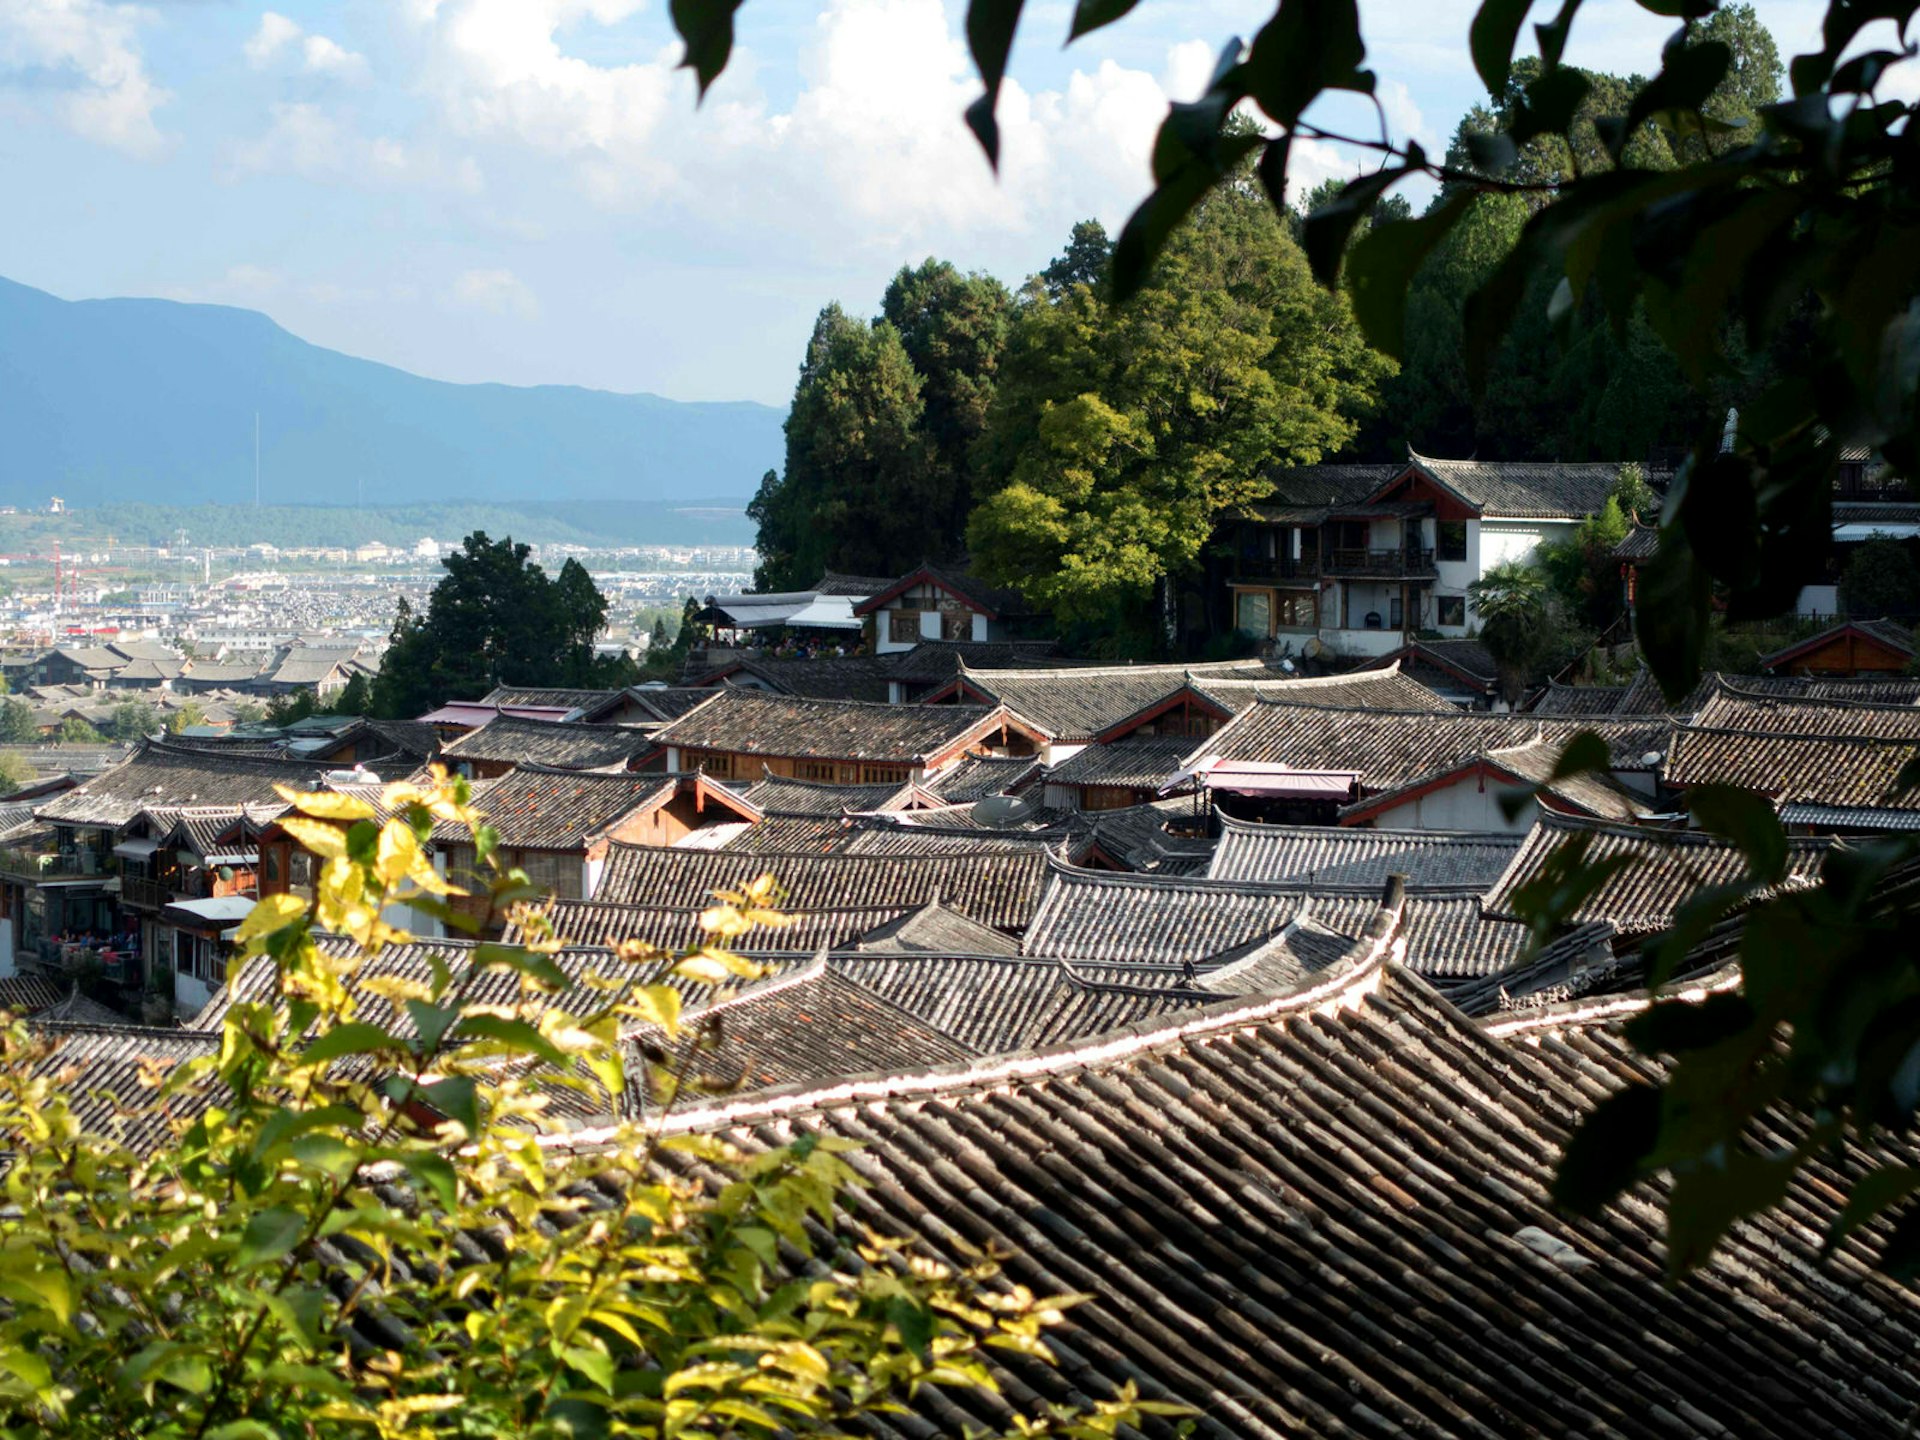 Historic Lijiang makes for a good stopover on a cycling tour of Yunnan © Tess Humphrys / Lonely Planet